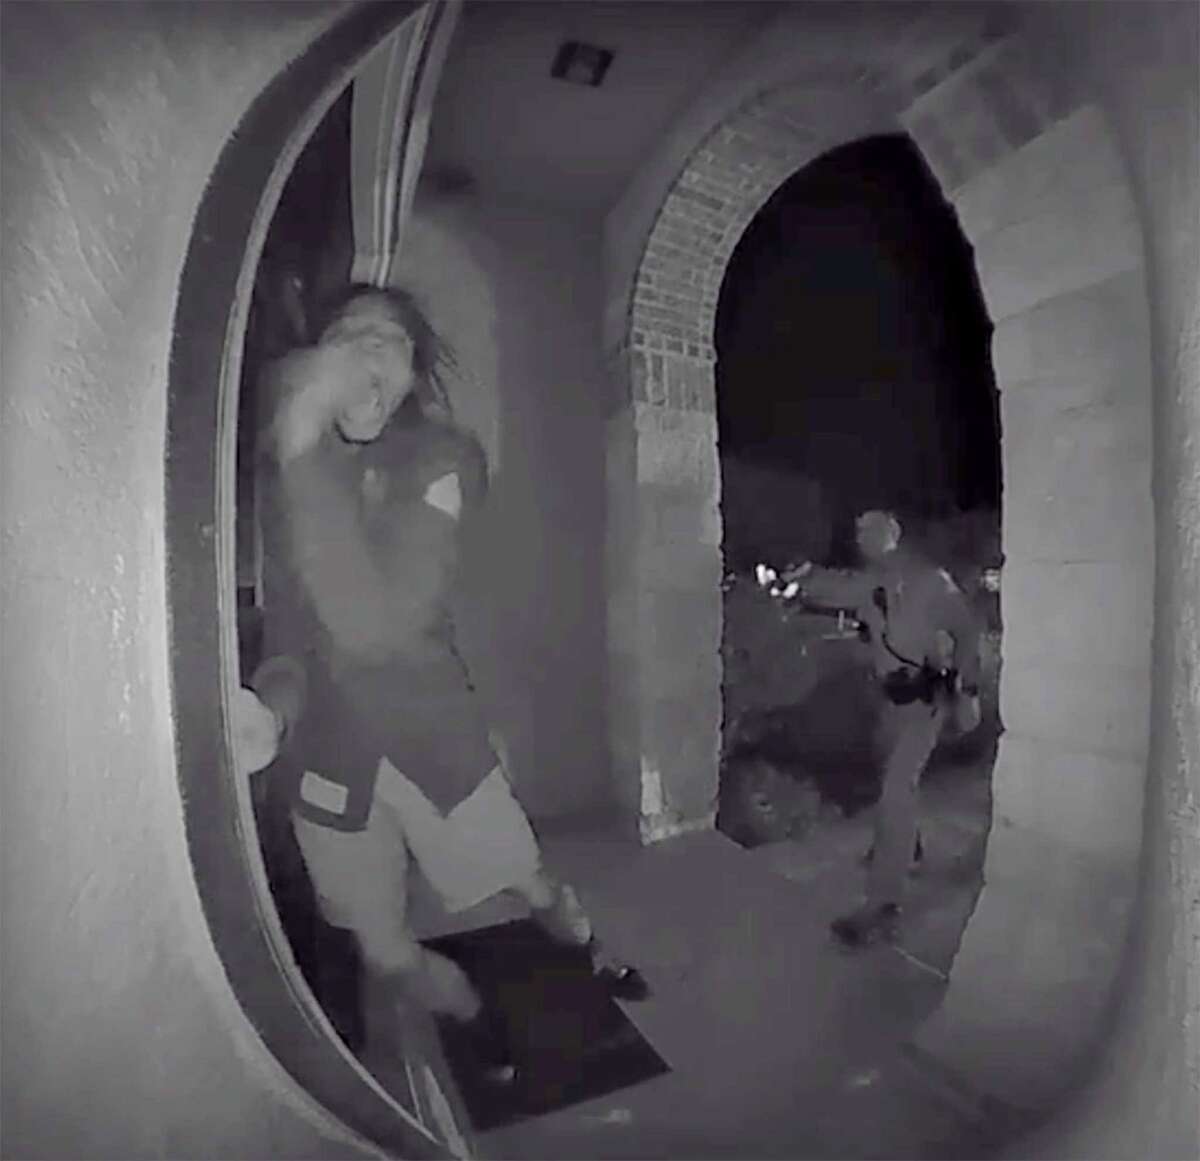 Screen grabs from a home surveillance video show Schertz Police tasing Zekee Rayford, 18, as he pounds on the front door of his home calling for his parents.